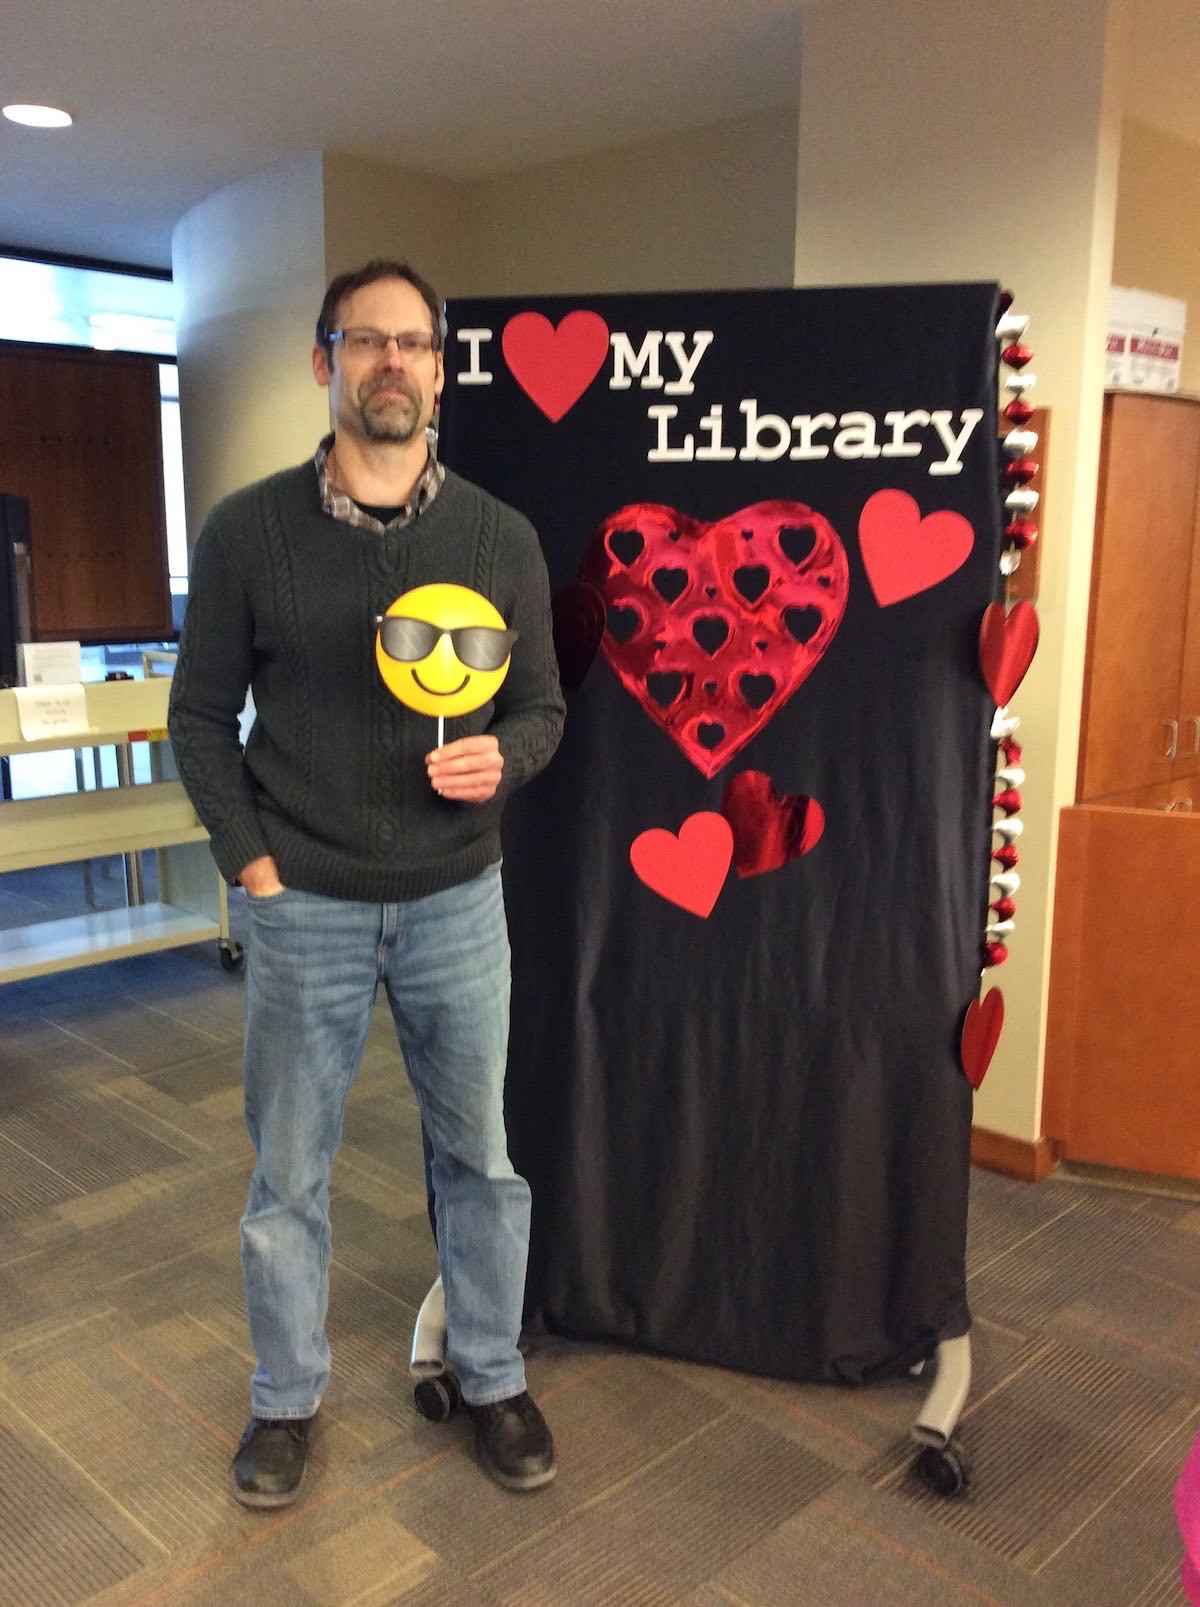 Librarian Michael Shires stands in front of the I love my Library backdrop holding a prop of a smiling sunglasses emoji up in front of his torso